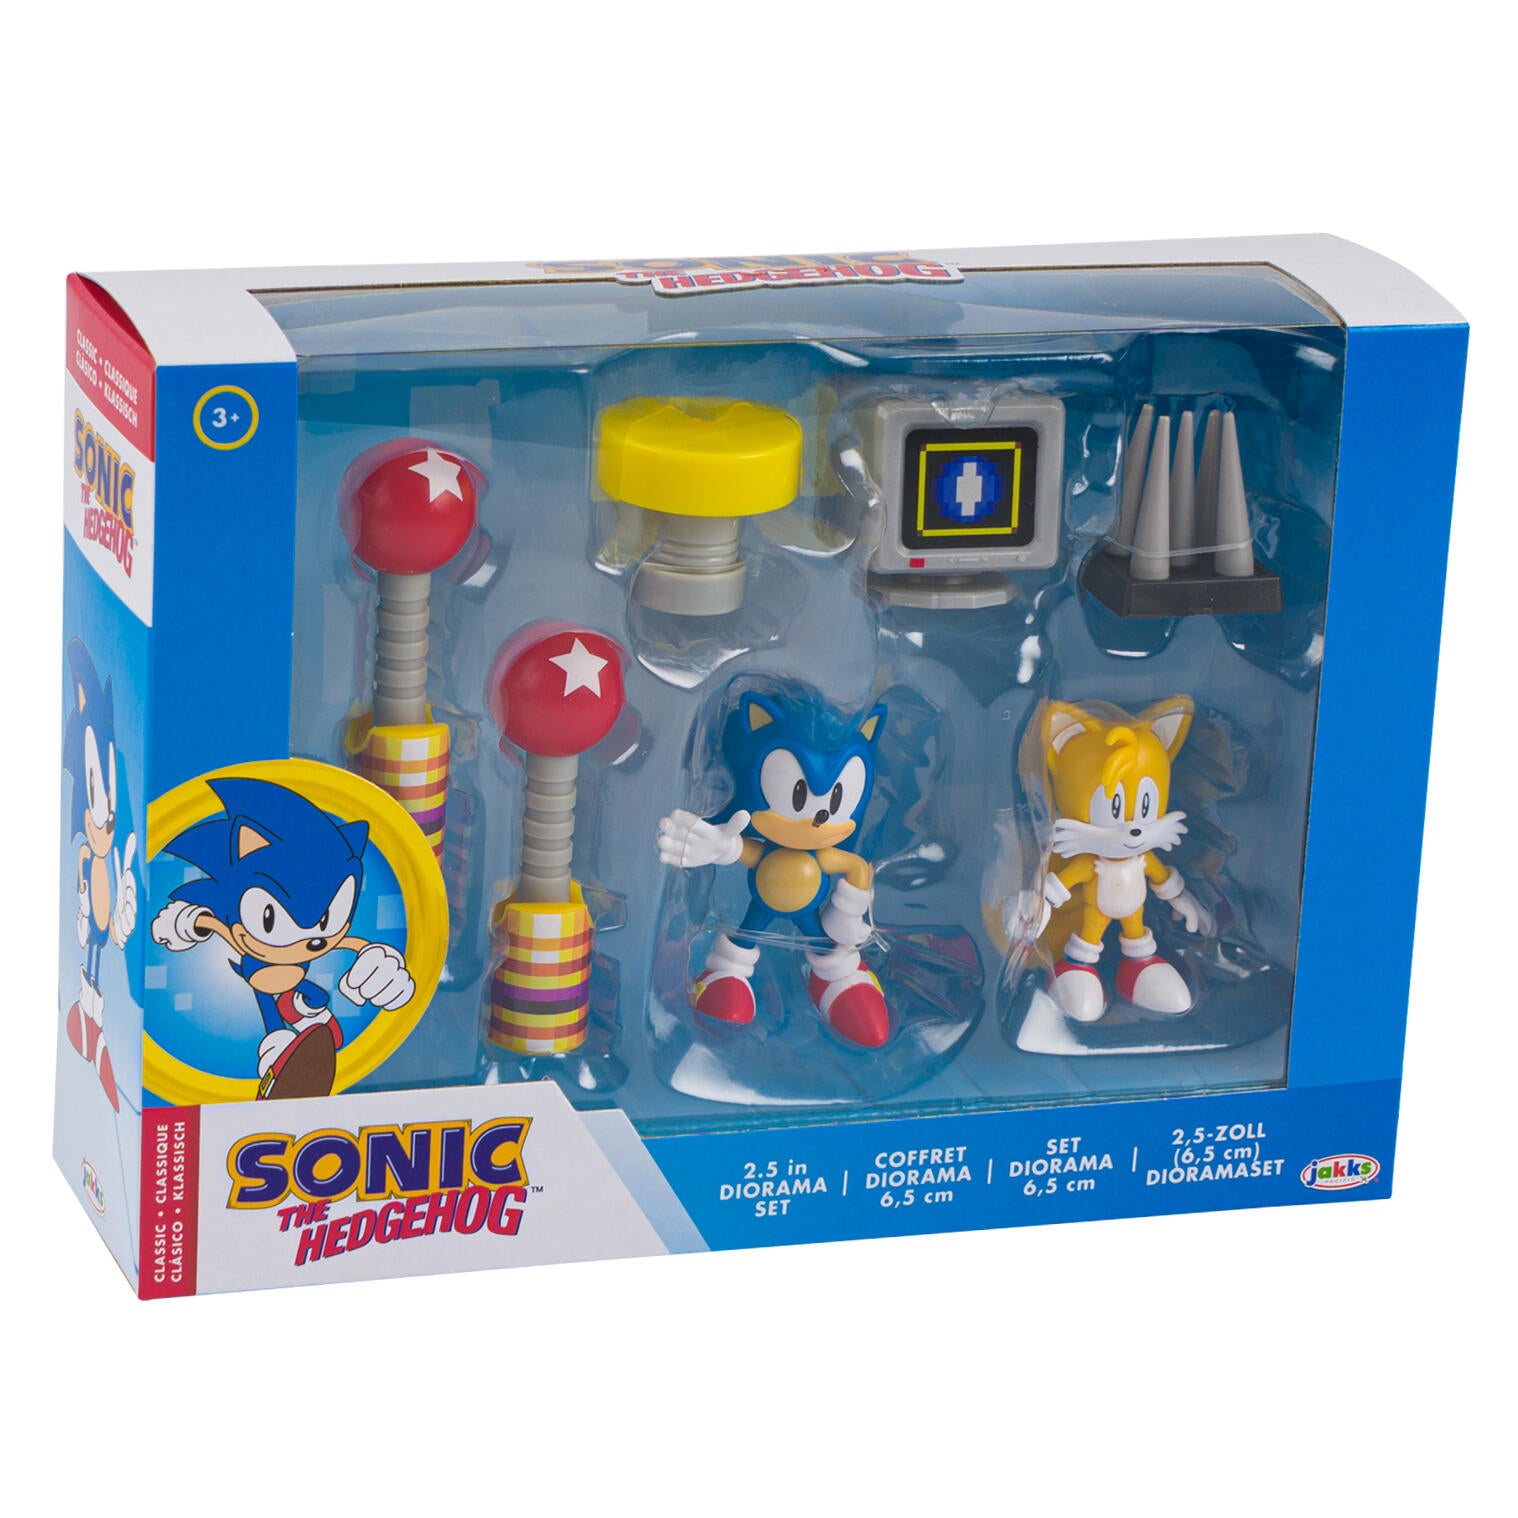 SONIC THE HEDGEHOG 2.5 INCH ACTION FIGURE DIORAMA SET